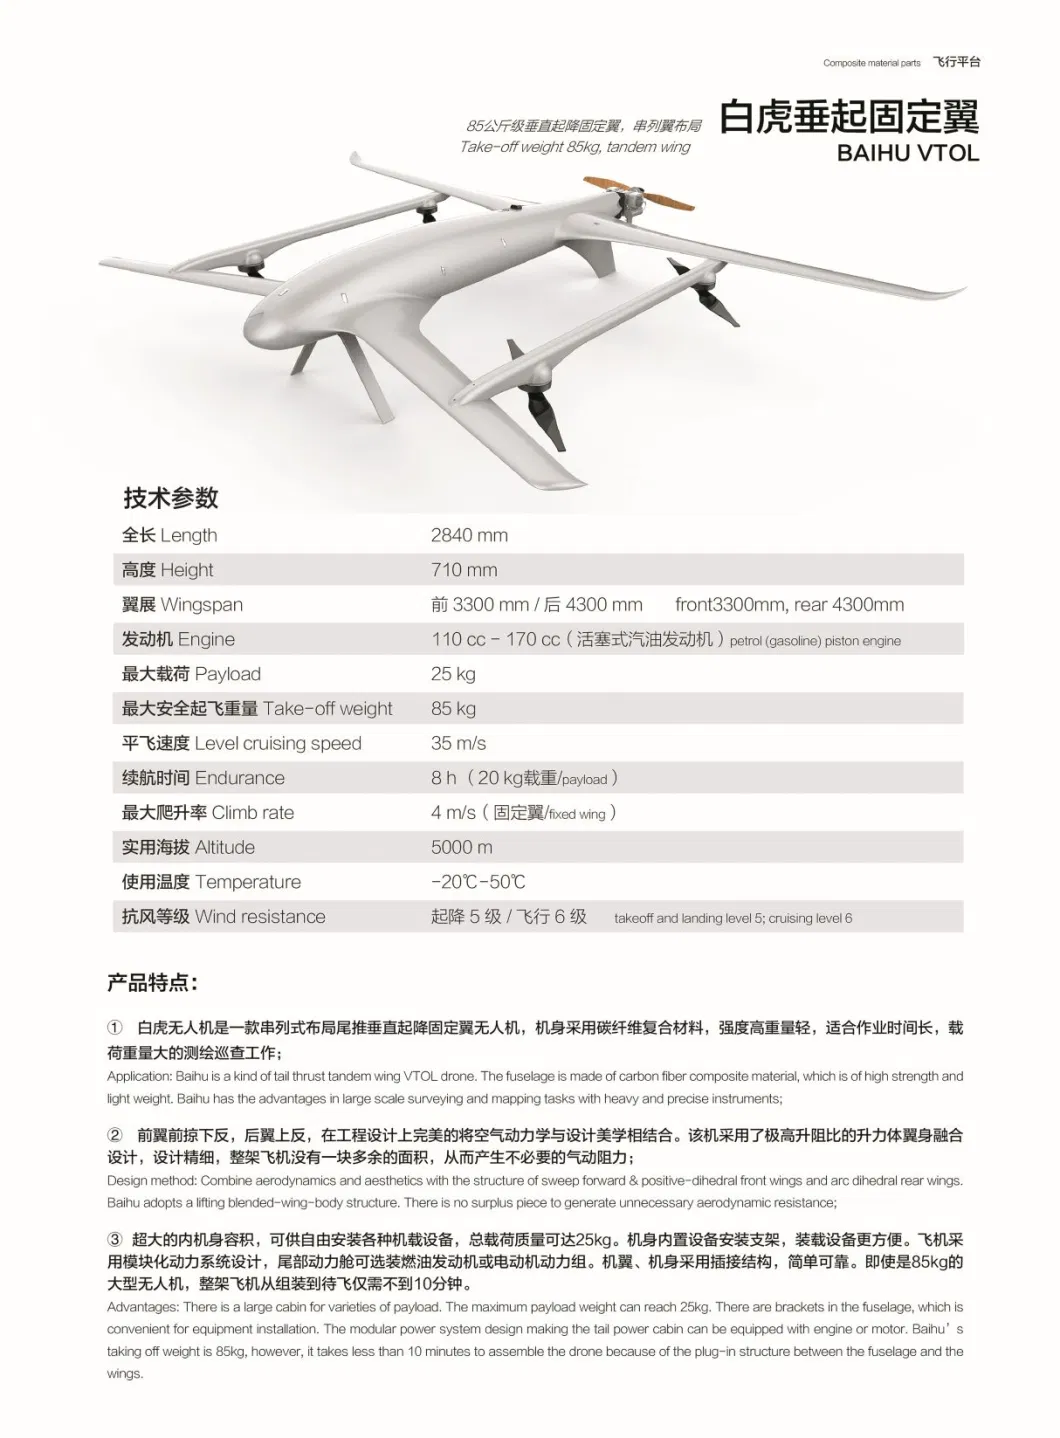 Long Endurance Heavy-Duty Surveying Mapping and Inspection Drone